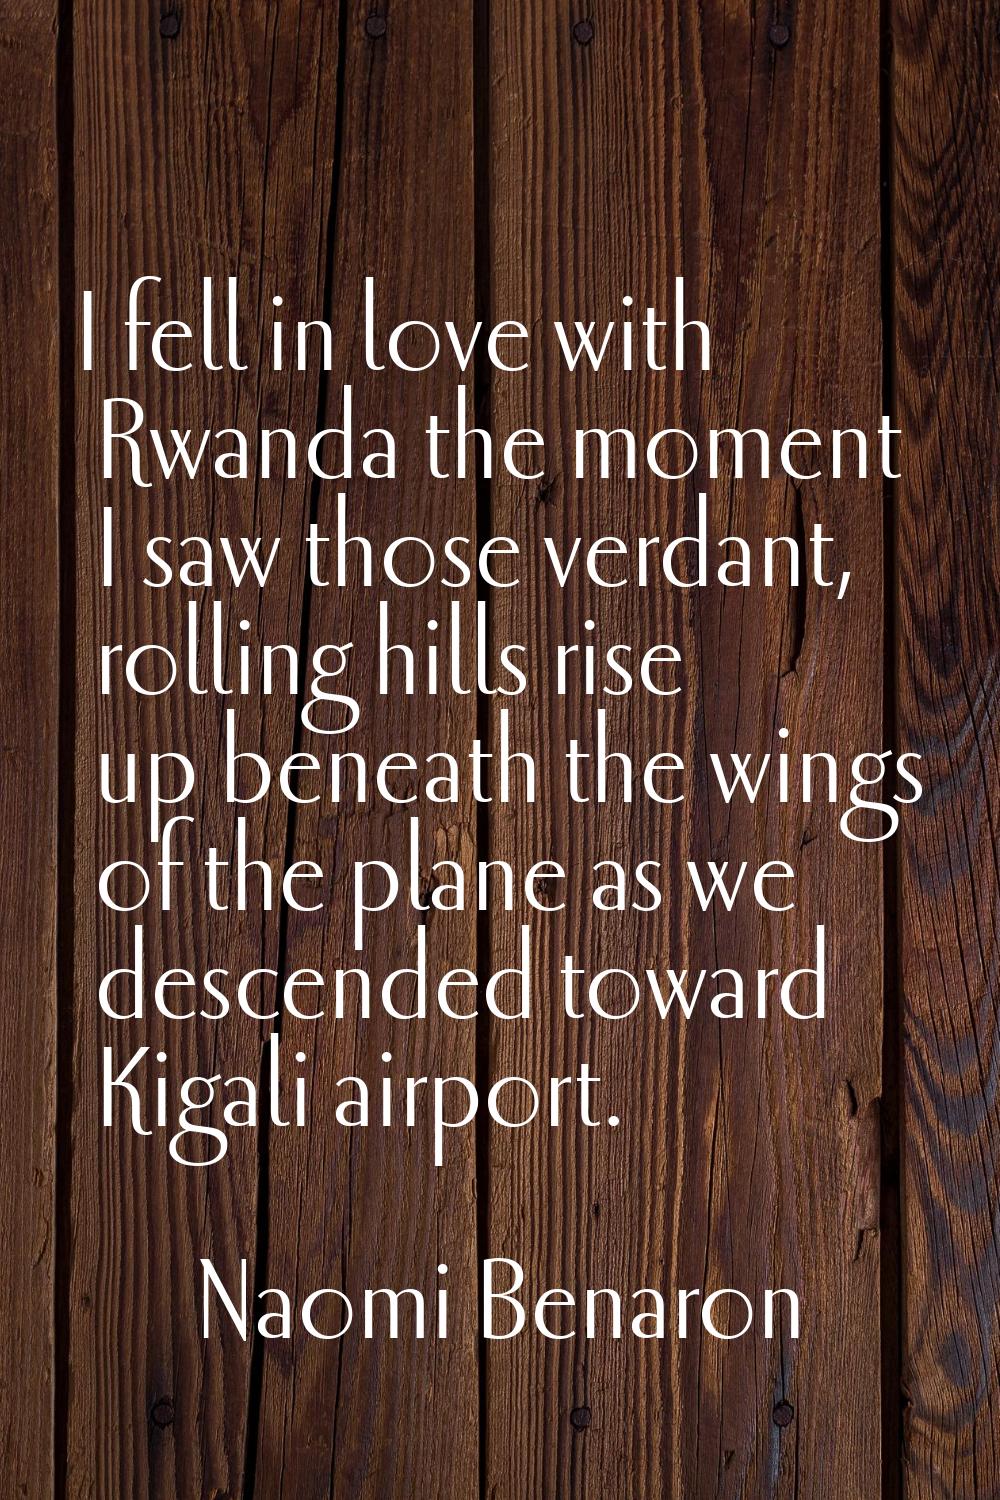 I fell in love with Rwanda the moment I saw those verdant, rolling hills rise up beneath the wings 